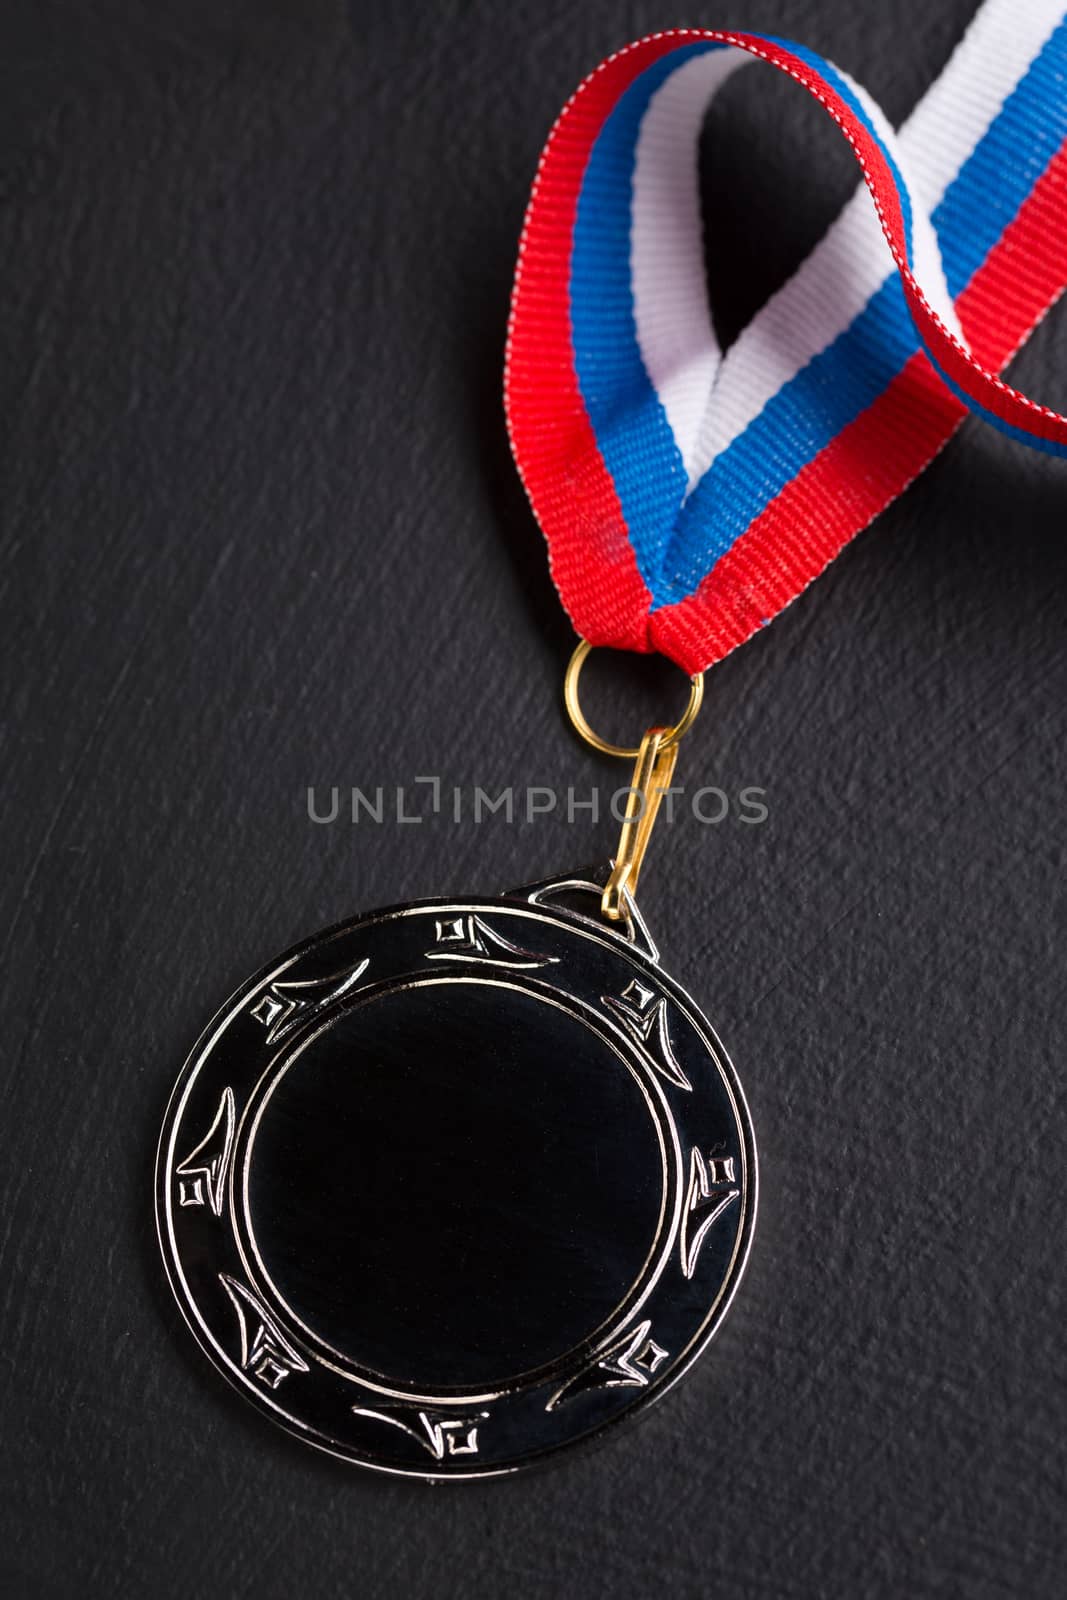 Metal medal with tricolor ribbon 